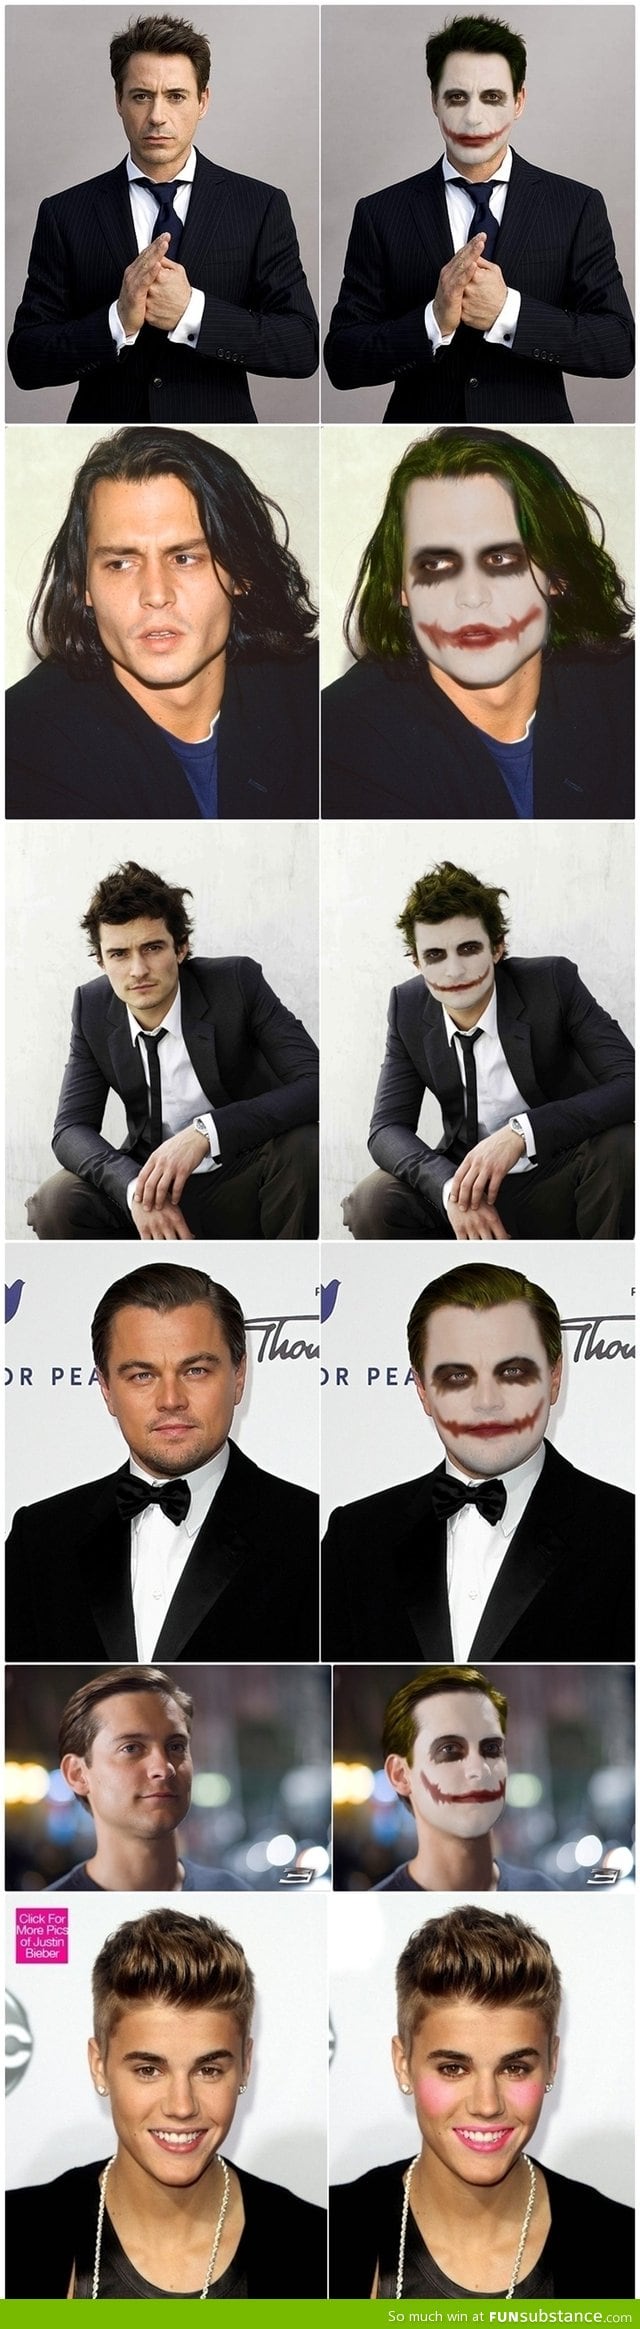 If they were the Joker